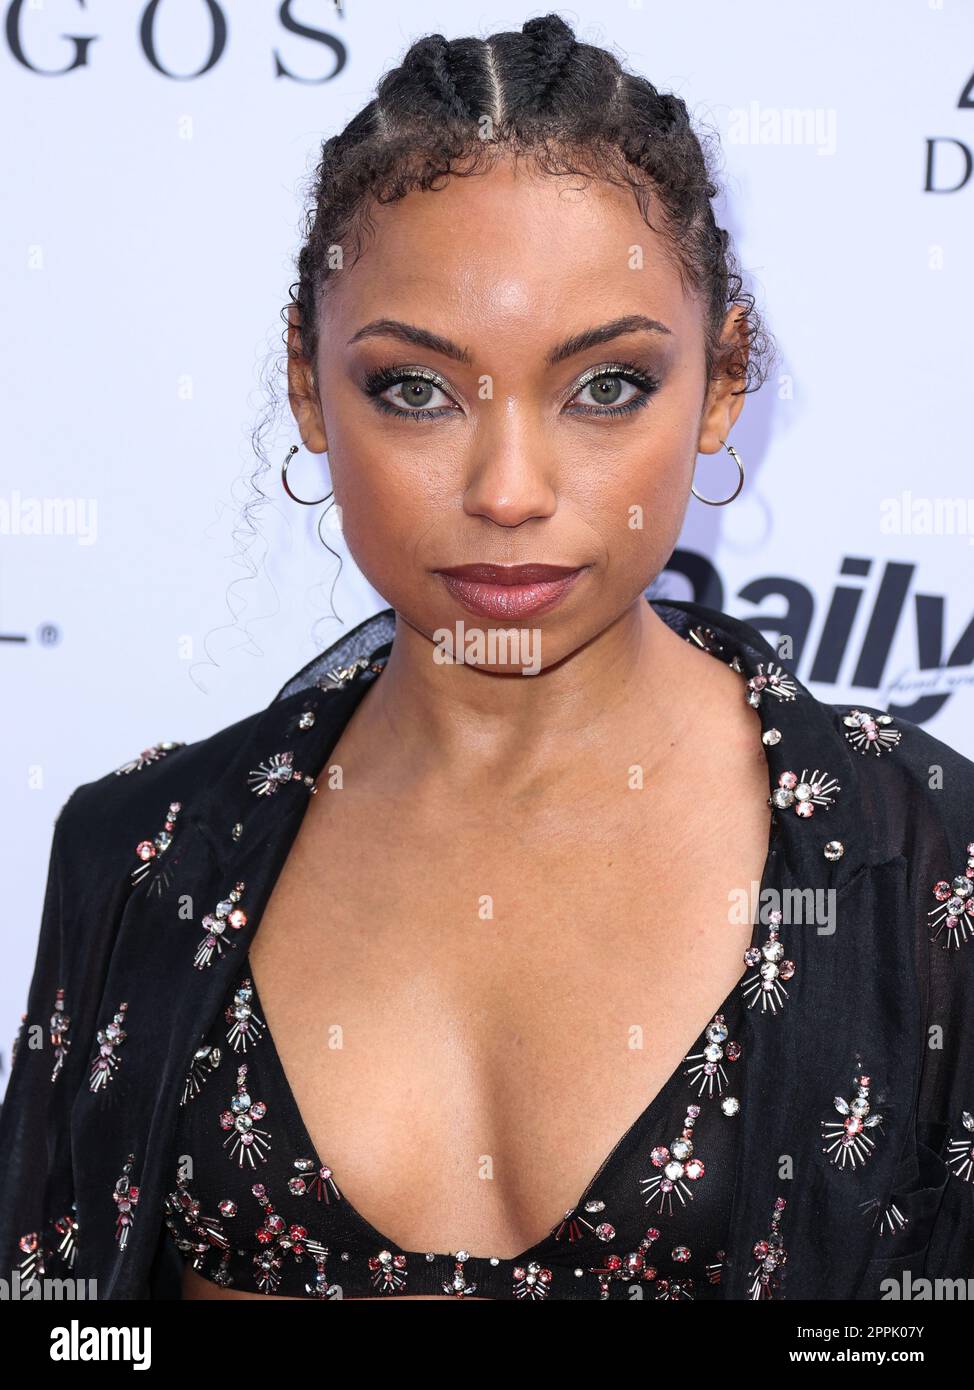 Beverly Hills, Stati Uniti. 23rd Apr, 2023. BEVERLY HILLS, LOS ANGELES, CALIFORNIA, USA - 23 APRILE: Logan Browning arriva al Daily Front Row's 7th Annual Fashion Los Angeles Awards che si tiene al Crystal Garden presso il Beverly Hills Hotel il 23 aprile 2023 a Beverly Hills, Los Angeles, California, Stati Uniti. (Foto di Xavier Collin/Image Press Agency) Credit: Image Press Agency/Alamy Live News Foto Stock